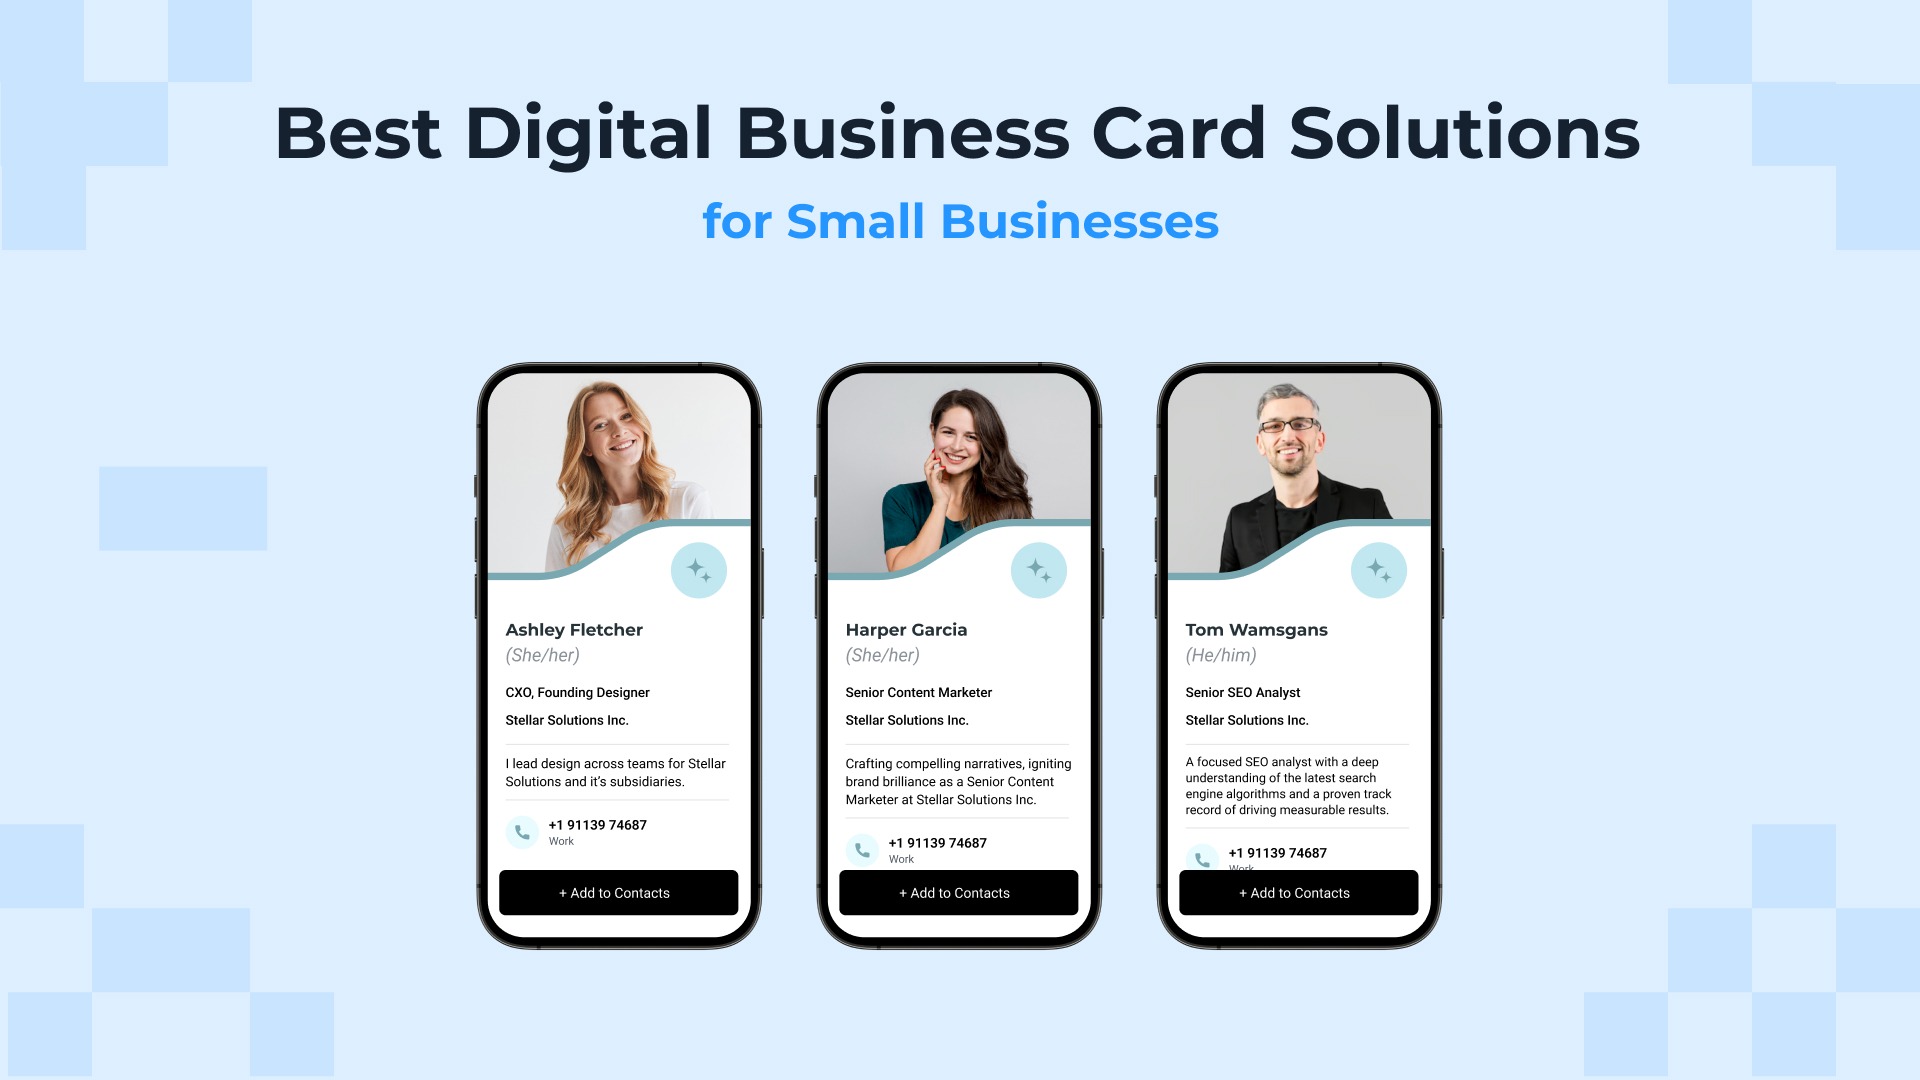 The 4 Best Digital Business Card Solutions for Small Businesses in 2023: Compare and Decide